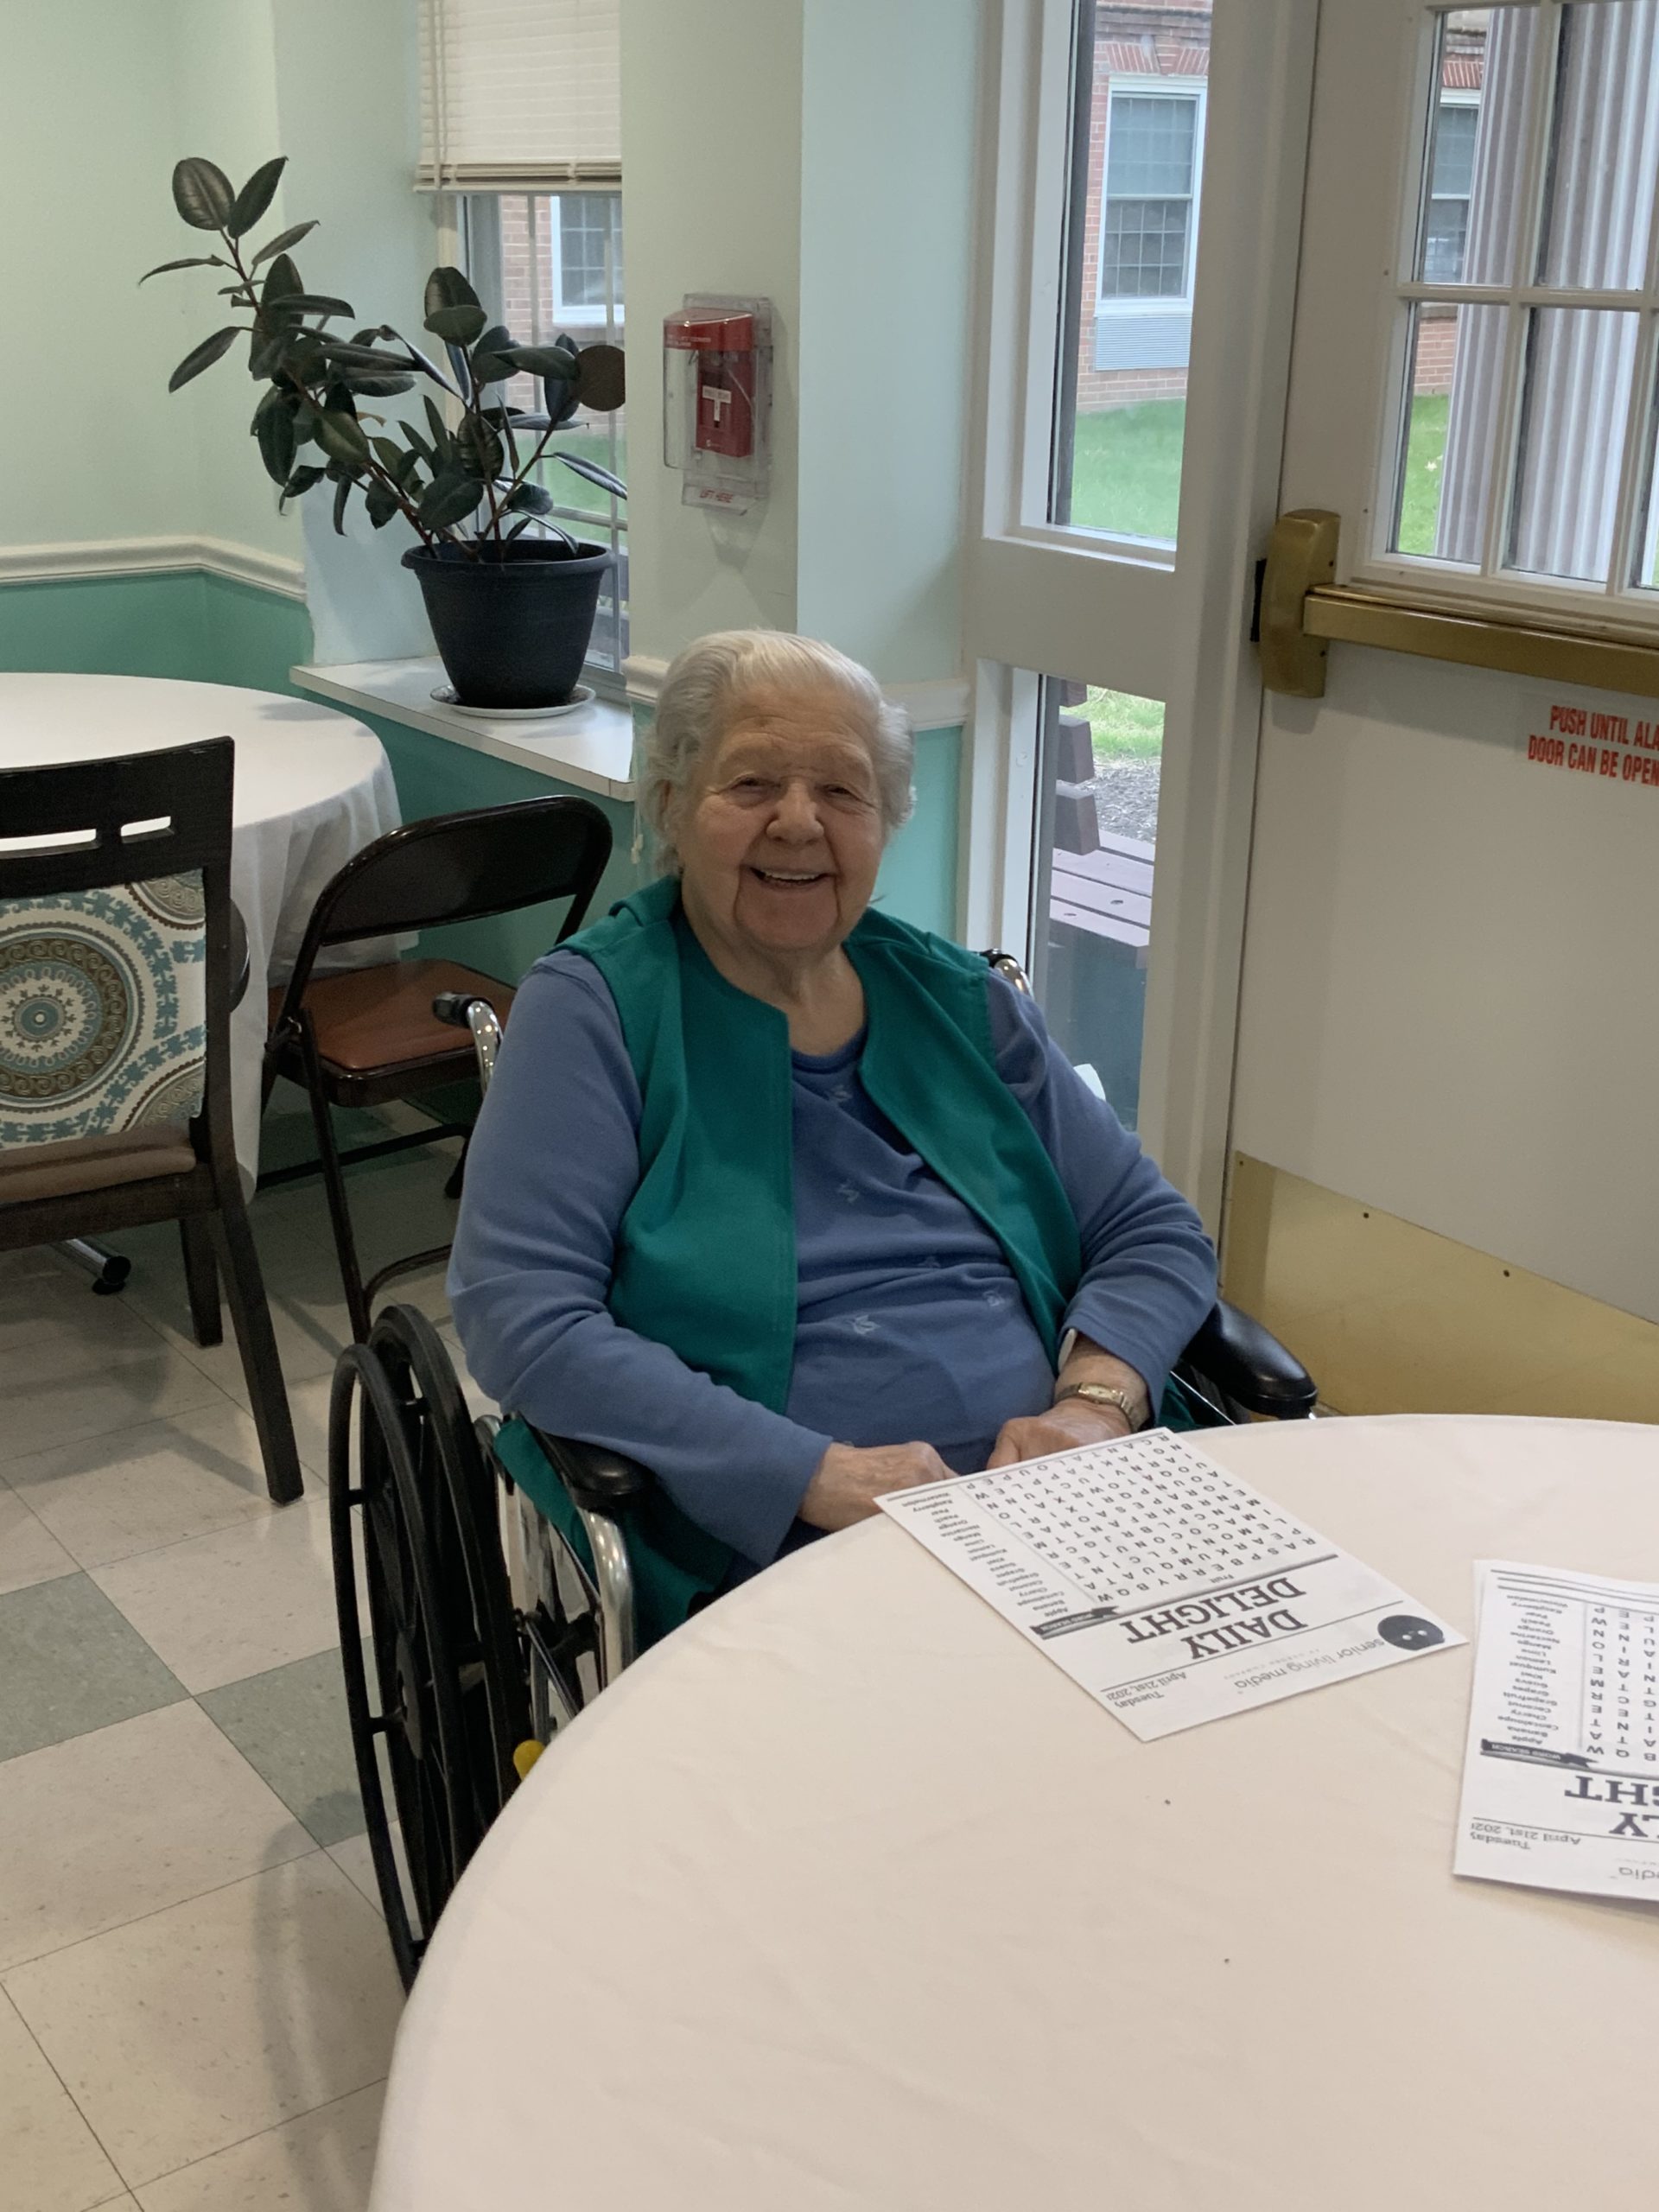 Resident satisfaction is key at Mount Carmel Care Center! We’re happy to share that our CoreQ Resident Satisfaction Survey results for the latest quarter (April-June 2020) were in the 100th percentile!